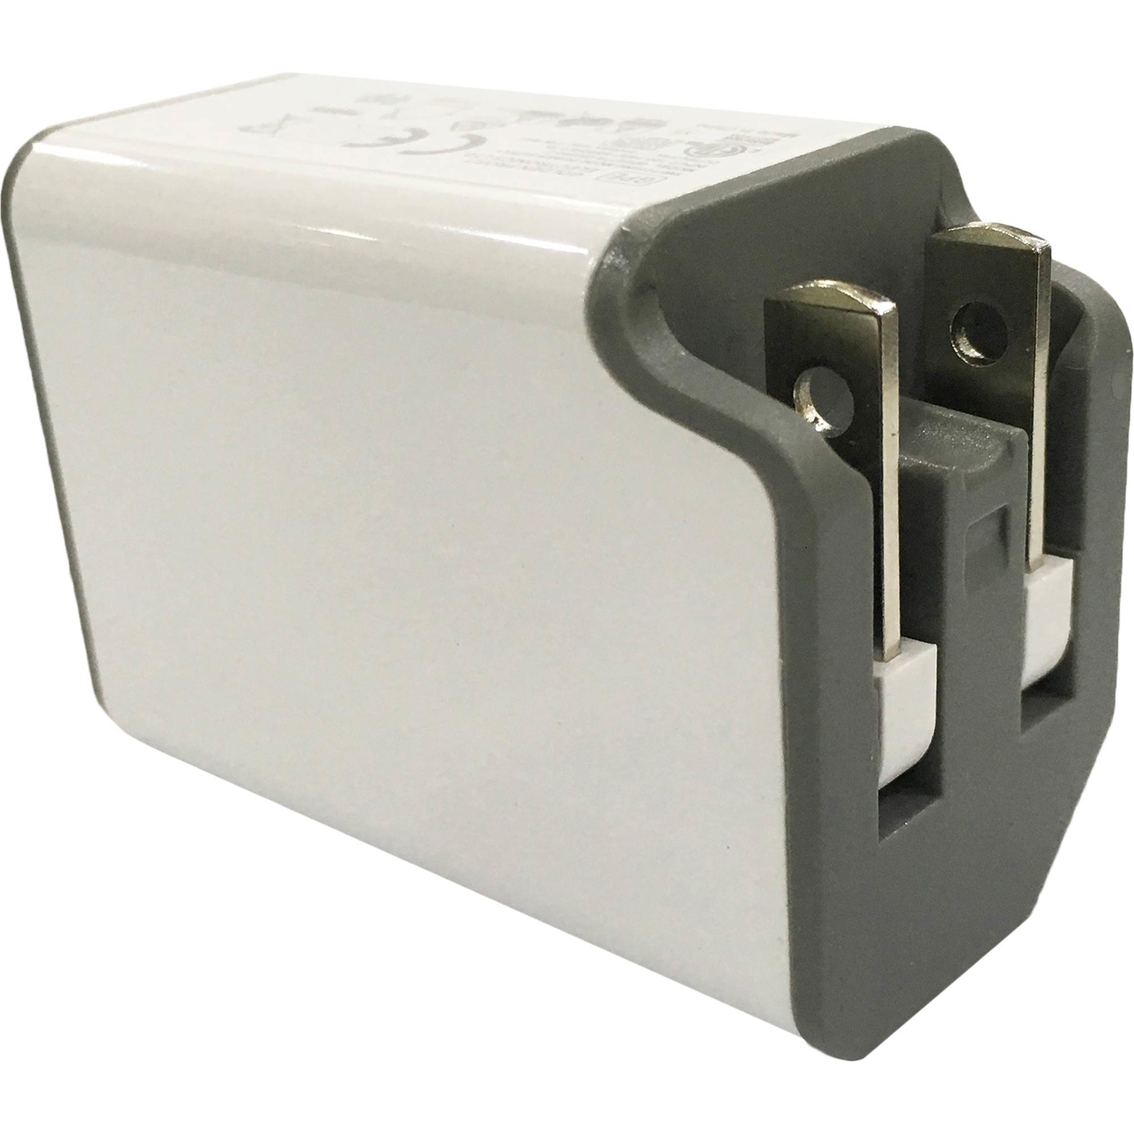 Powerzone 3.4A Type C & USB Wall Charger - Image 2 of 6